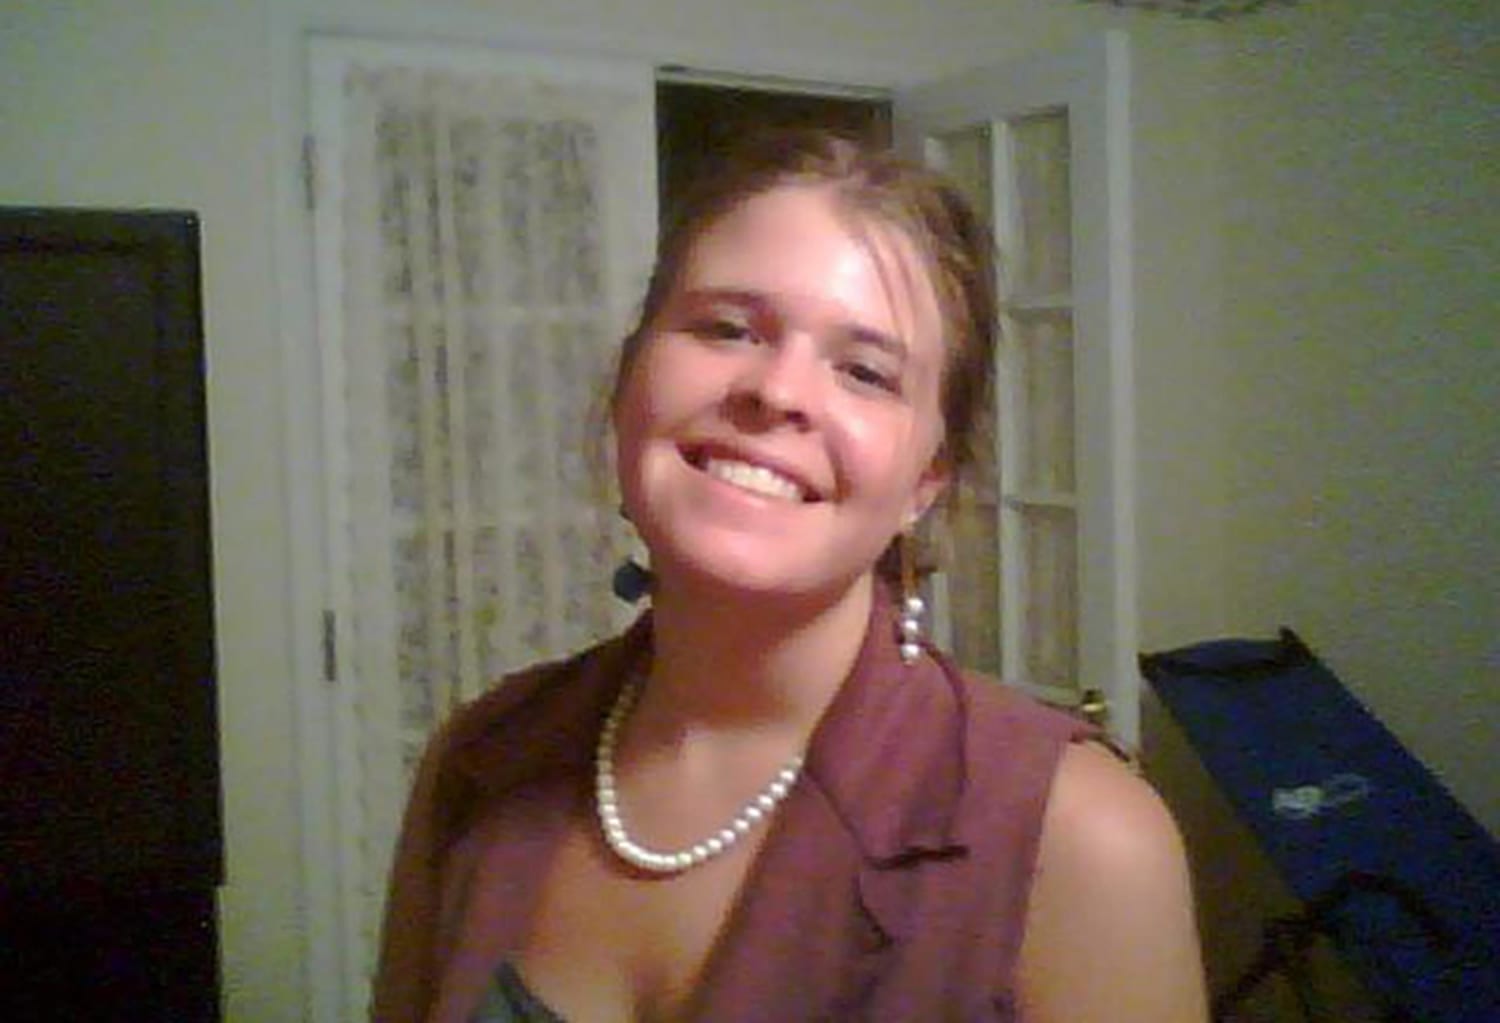 American ISIS Hostage KAYLA MUELLER Is Dead, Family Says - NBC News.